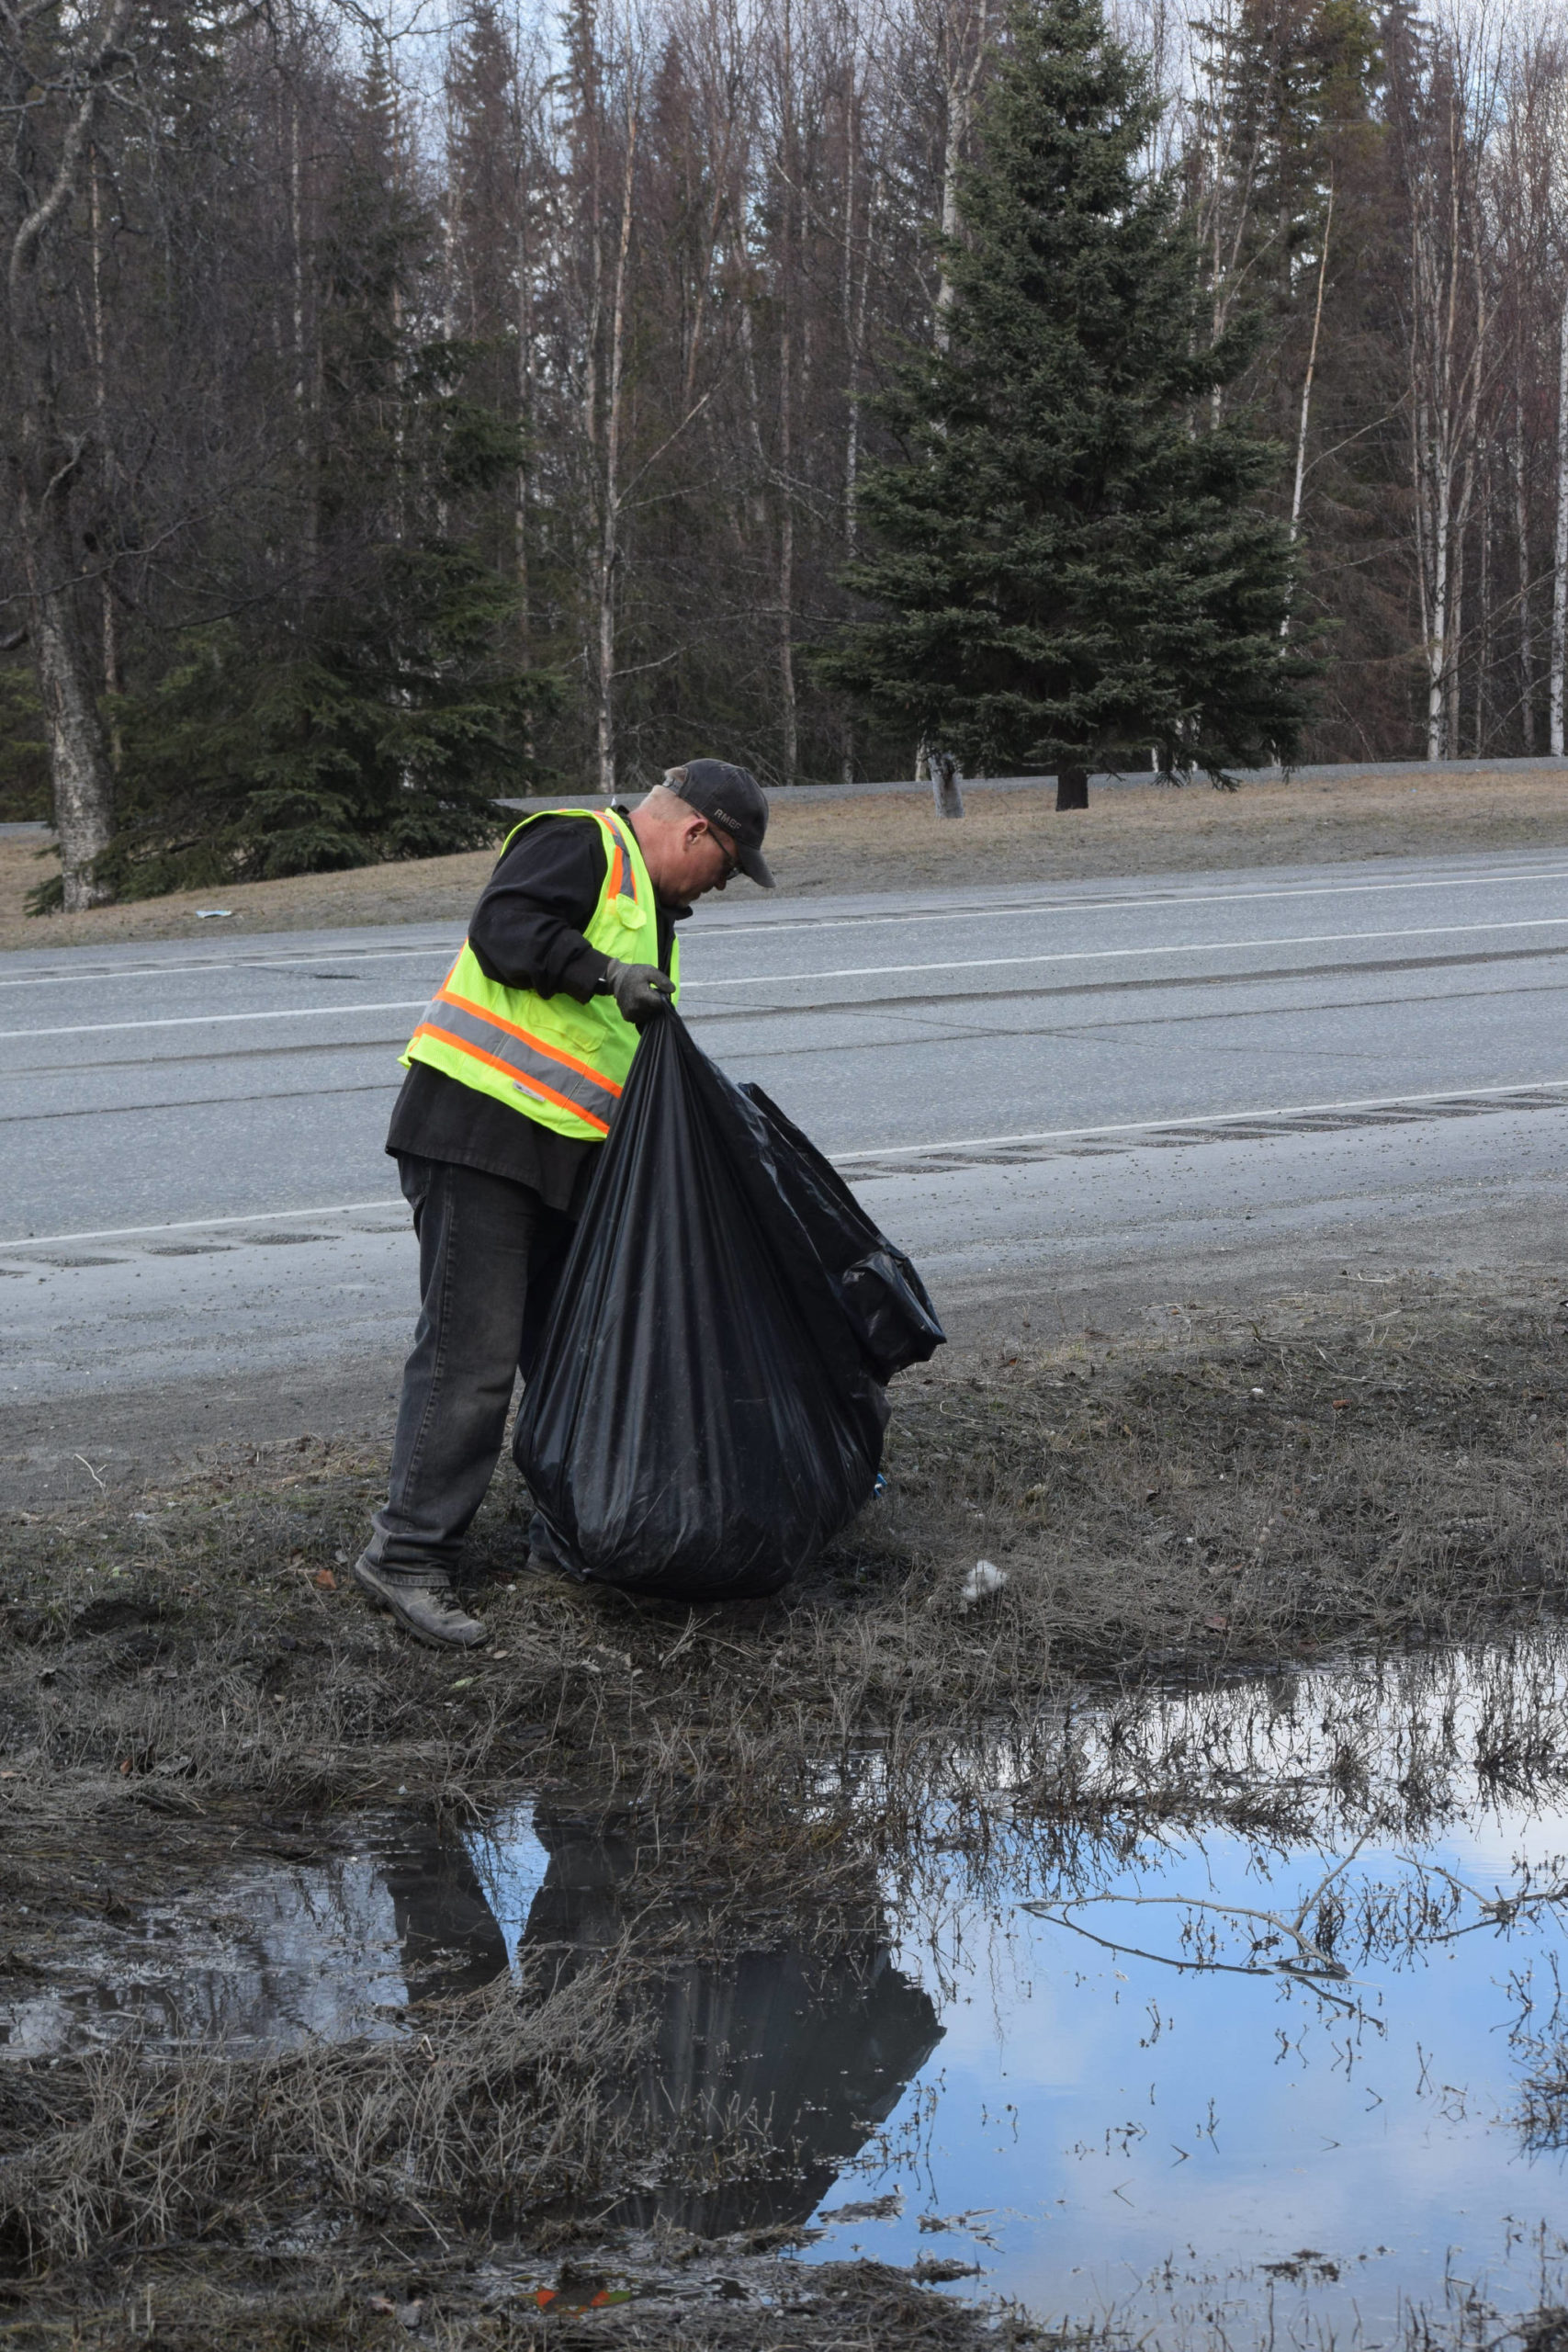 Friends of Alaska National Wildlife Refuge Volunteer Dan Musgrove collects litter from the side of the highway at the refuge in Soldotna, Alaska on Friday, April 30, 2021. (Camille Botello / Peninsula Clarion)